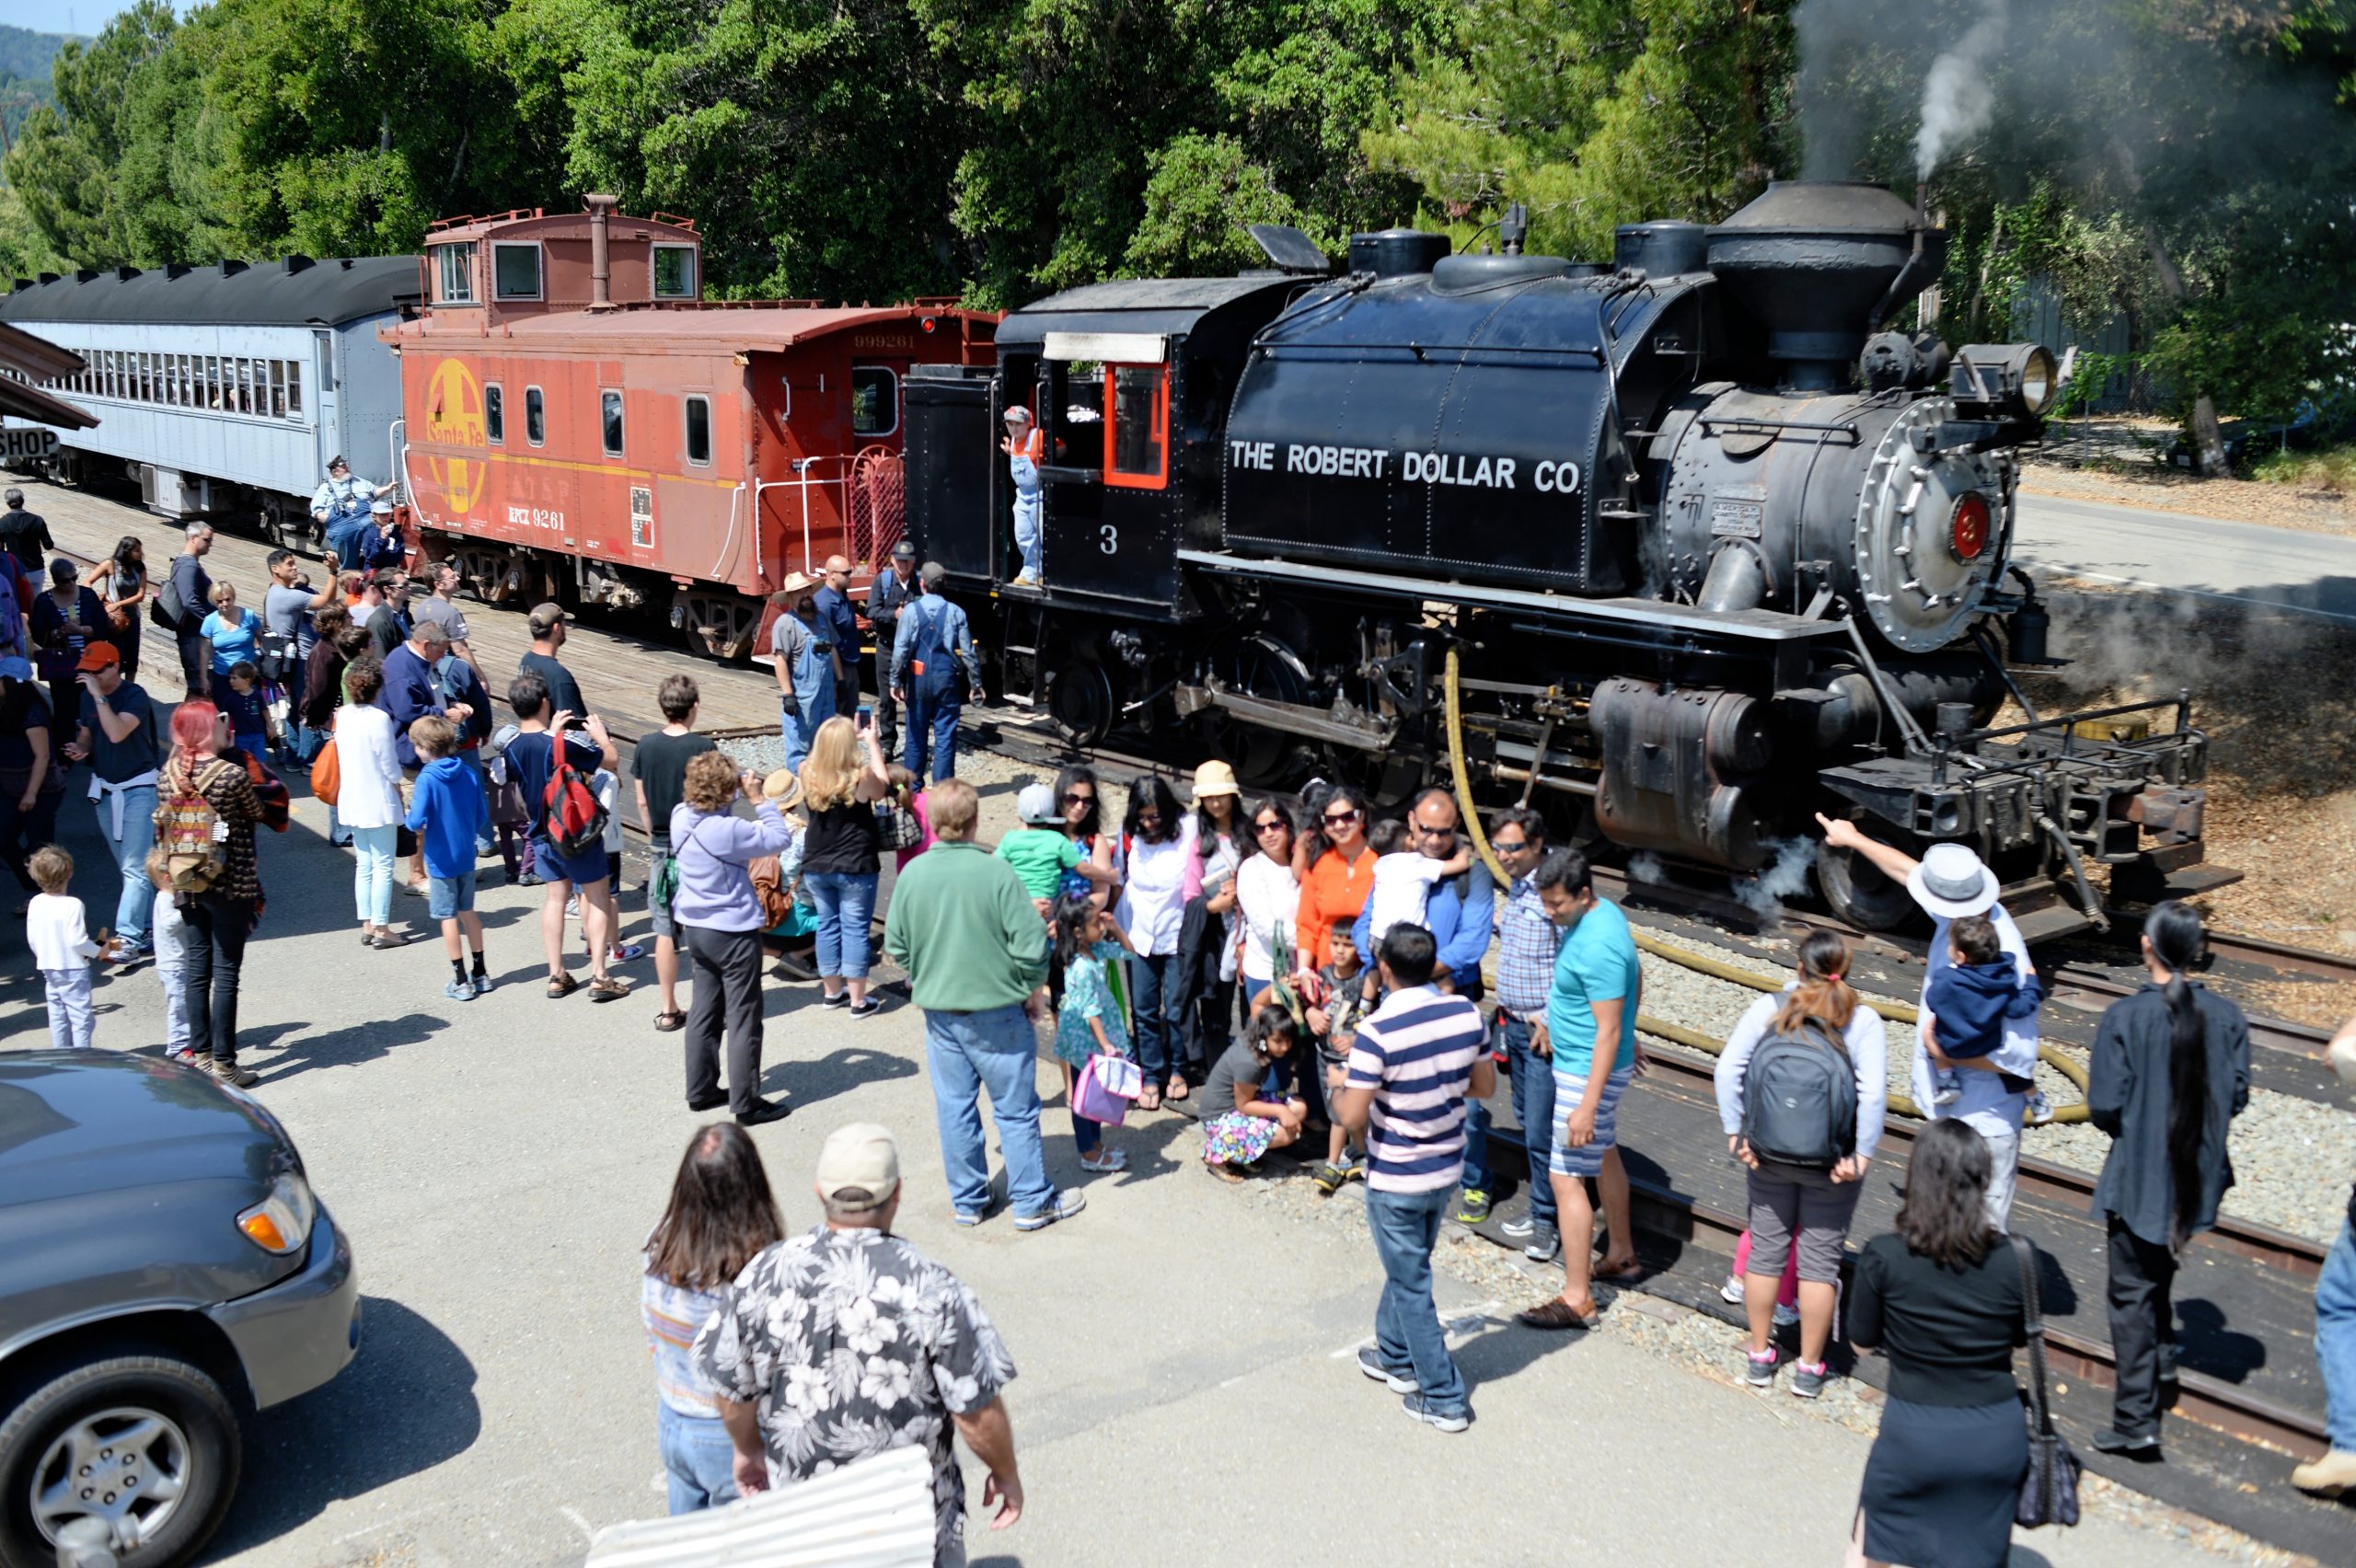 A steam locomotive powered passenger train sits in the Sunol station while a large group of passengers on the station platform view the locomotive and have their pictures taken in front of the locomotive.